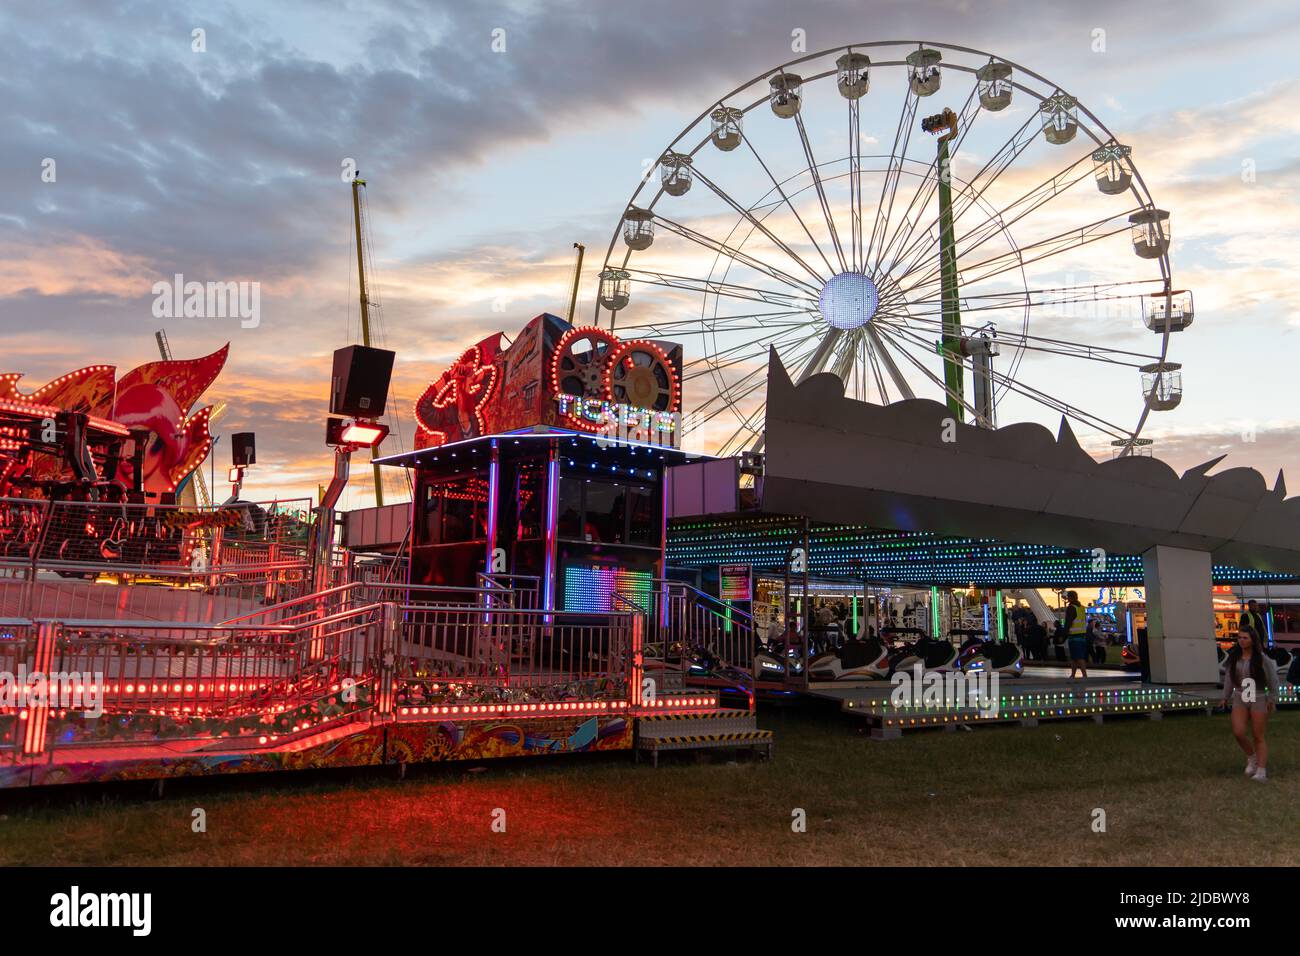 The Big Wheel funfair ride, on an evening with a dramatic sunset sky. The 140th ‘Hoppings’ on the Town Moor, Newcastle upon Tyne, UK Stock Photo